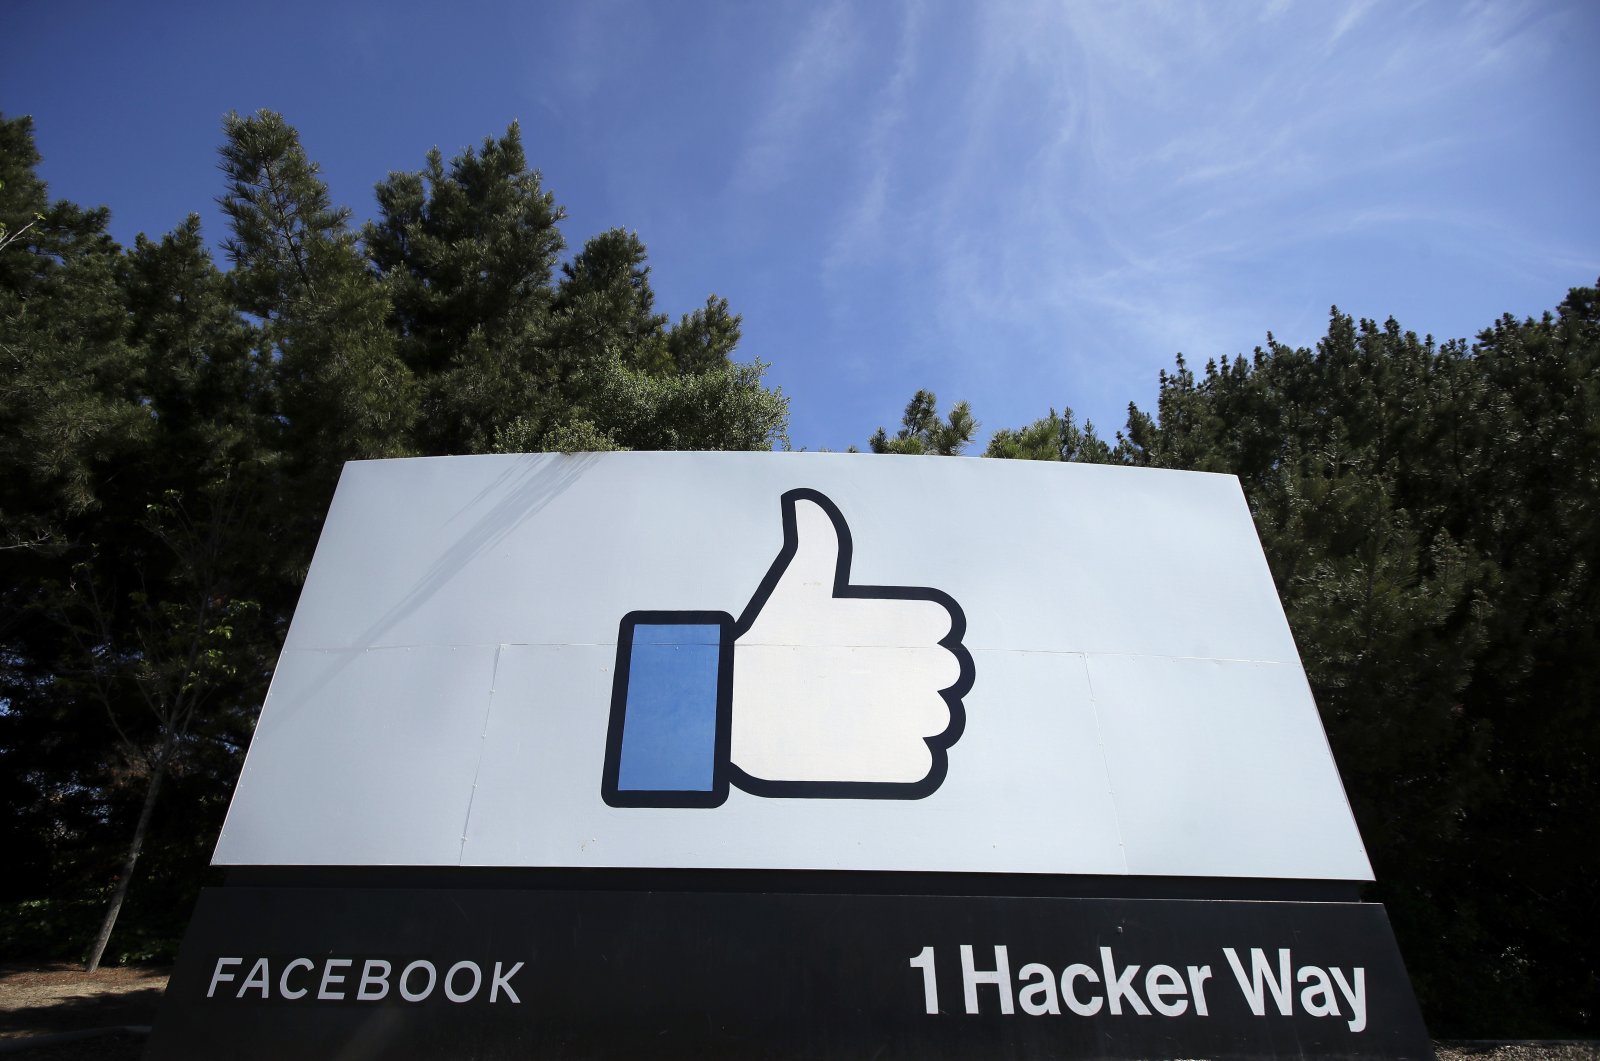 The thumbs up "Like" logo is shown on a sign at Facebook headquarters in Menlo Park, California, the U.S., April 14, 2020. (AP File Photo)